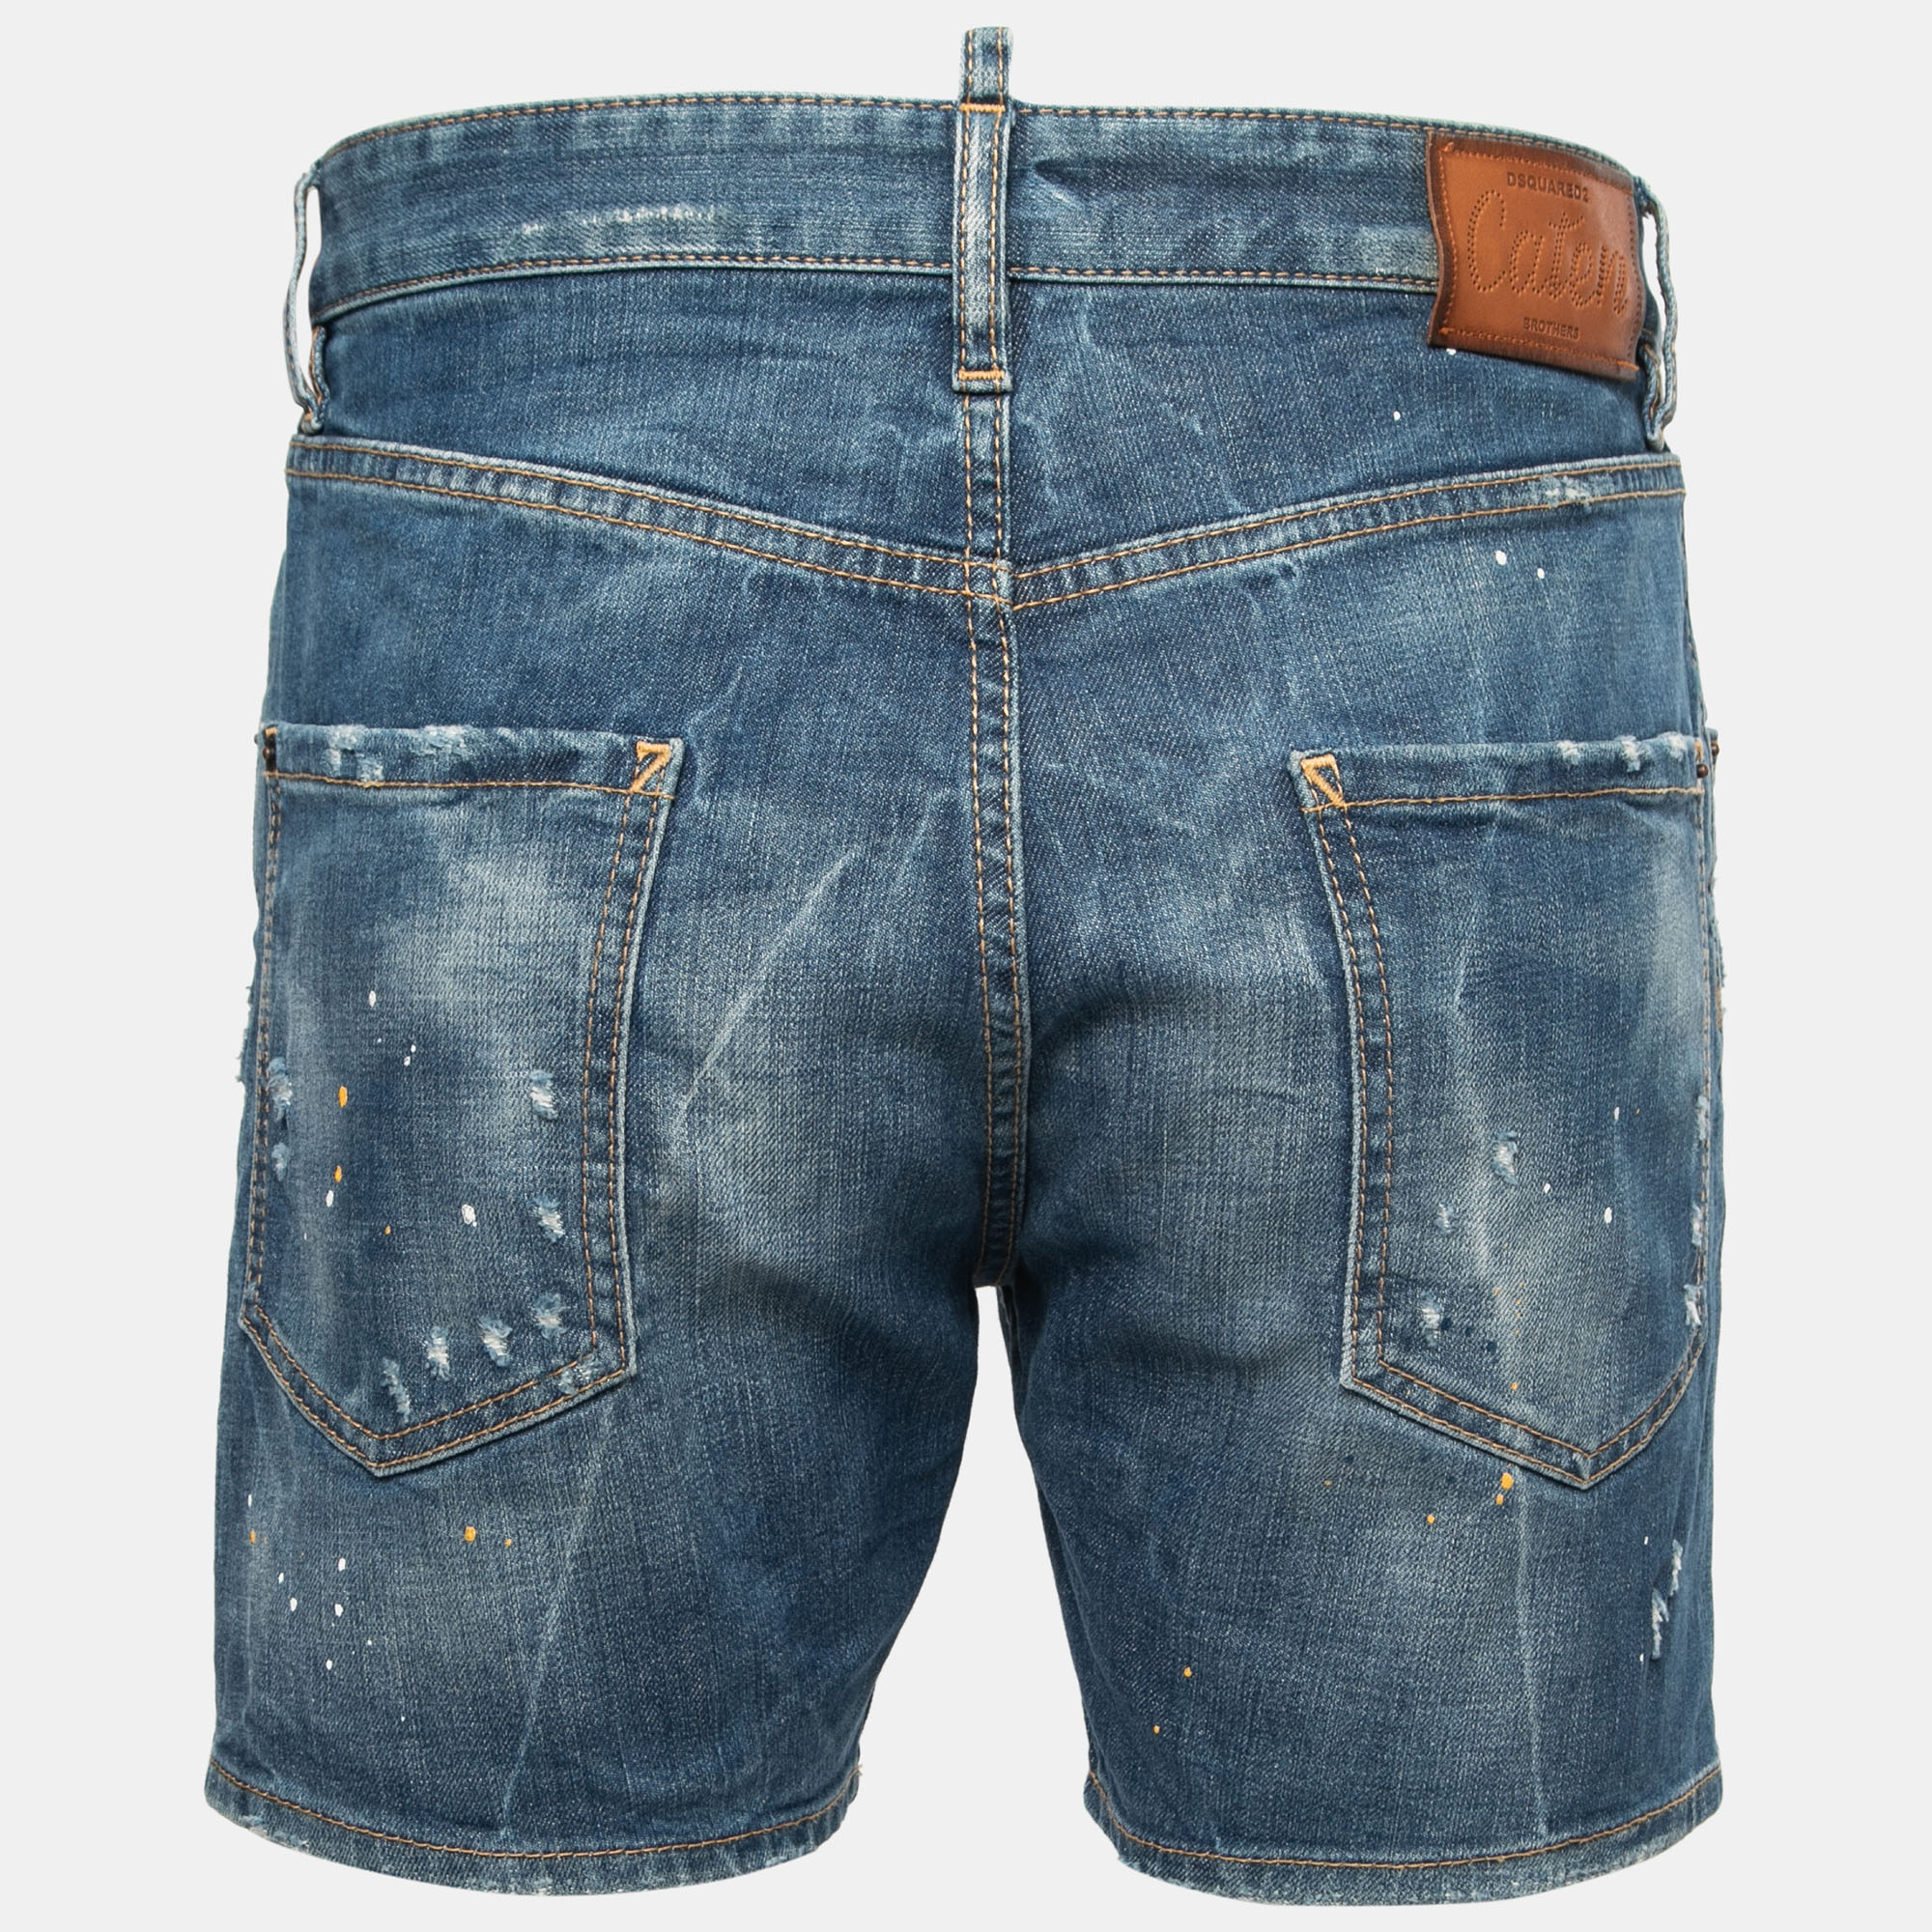 DSquared2 Blue Distressed Paint Splattered Denim Shorts M Waist 33  - buy with discount